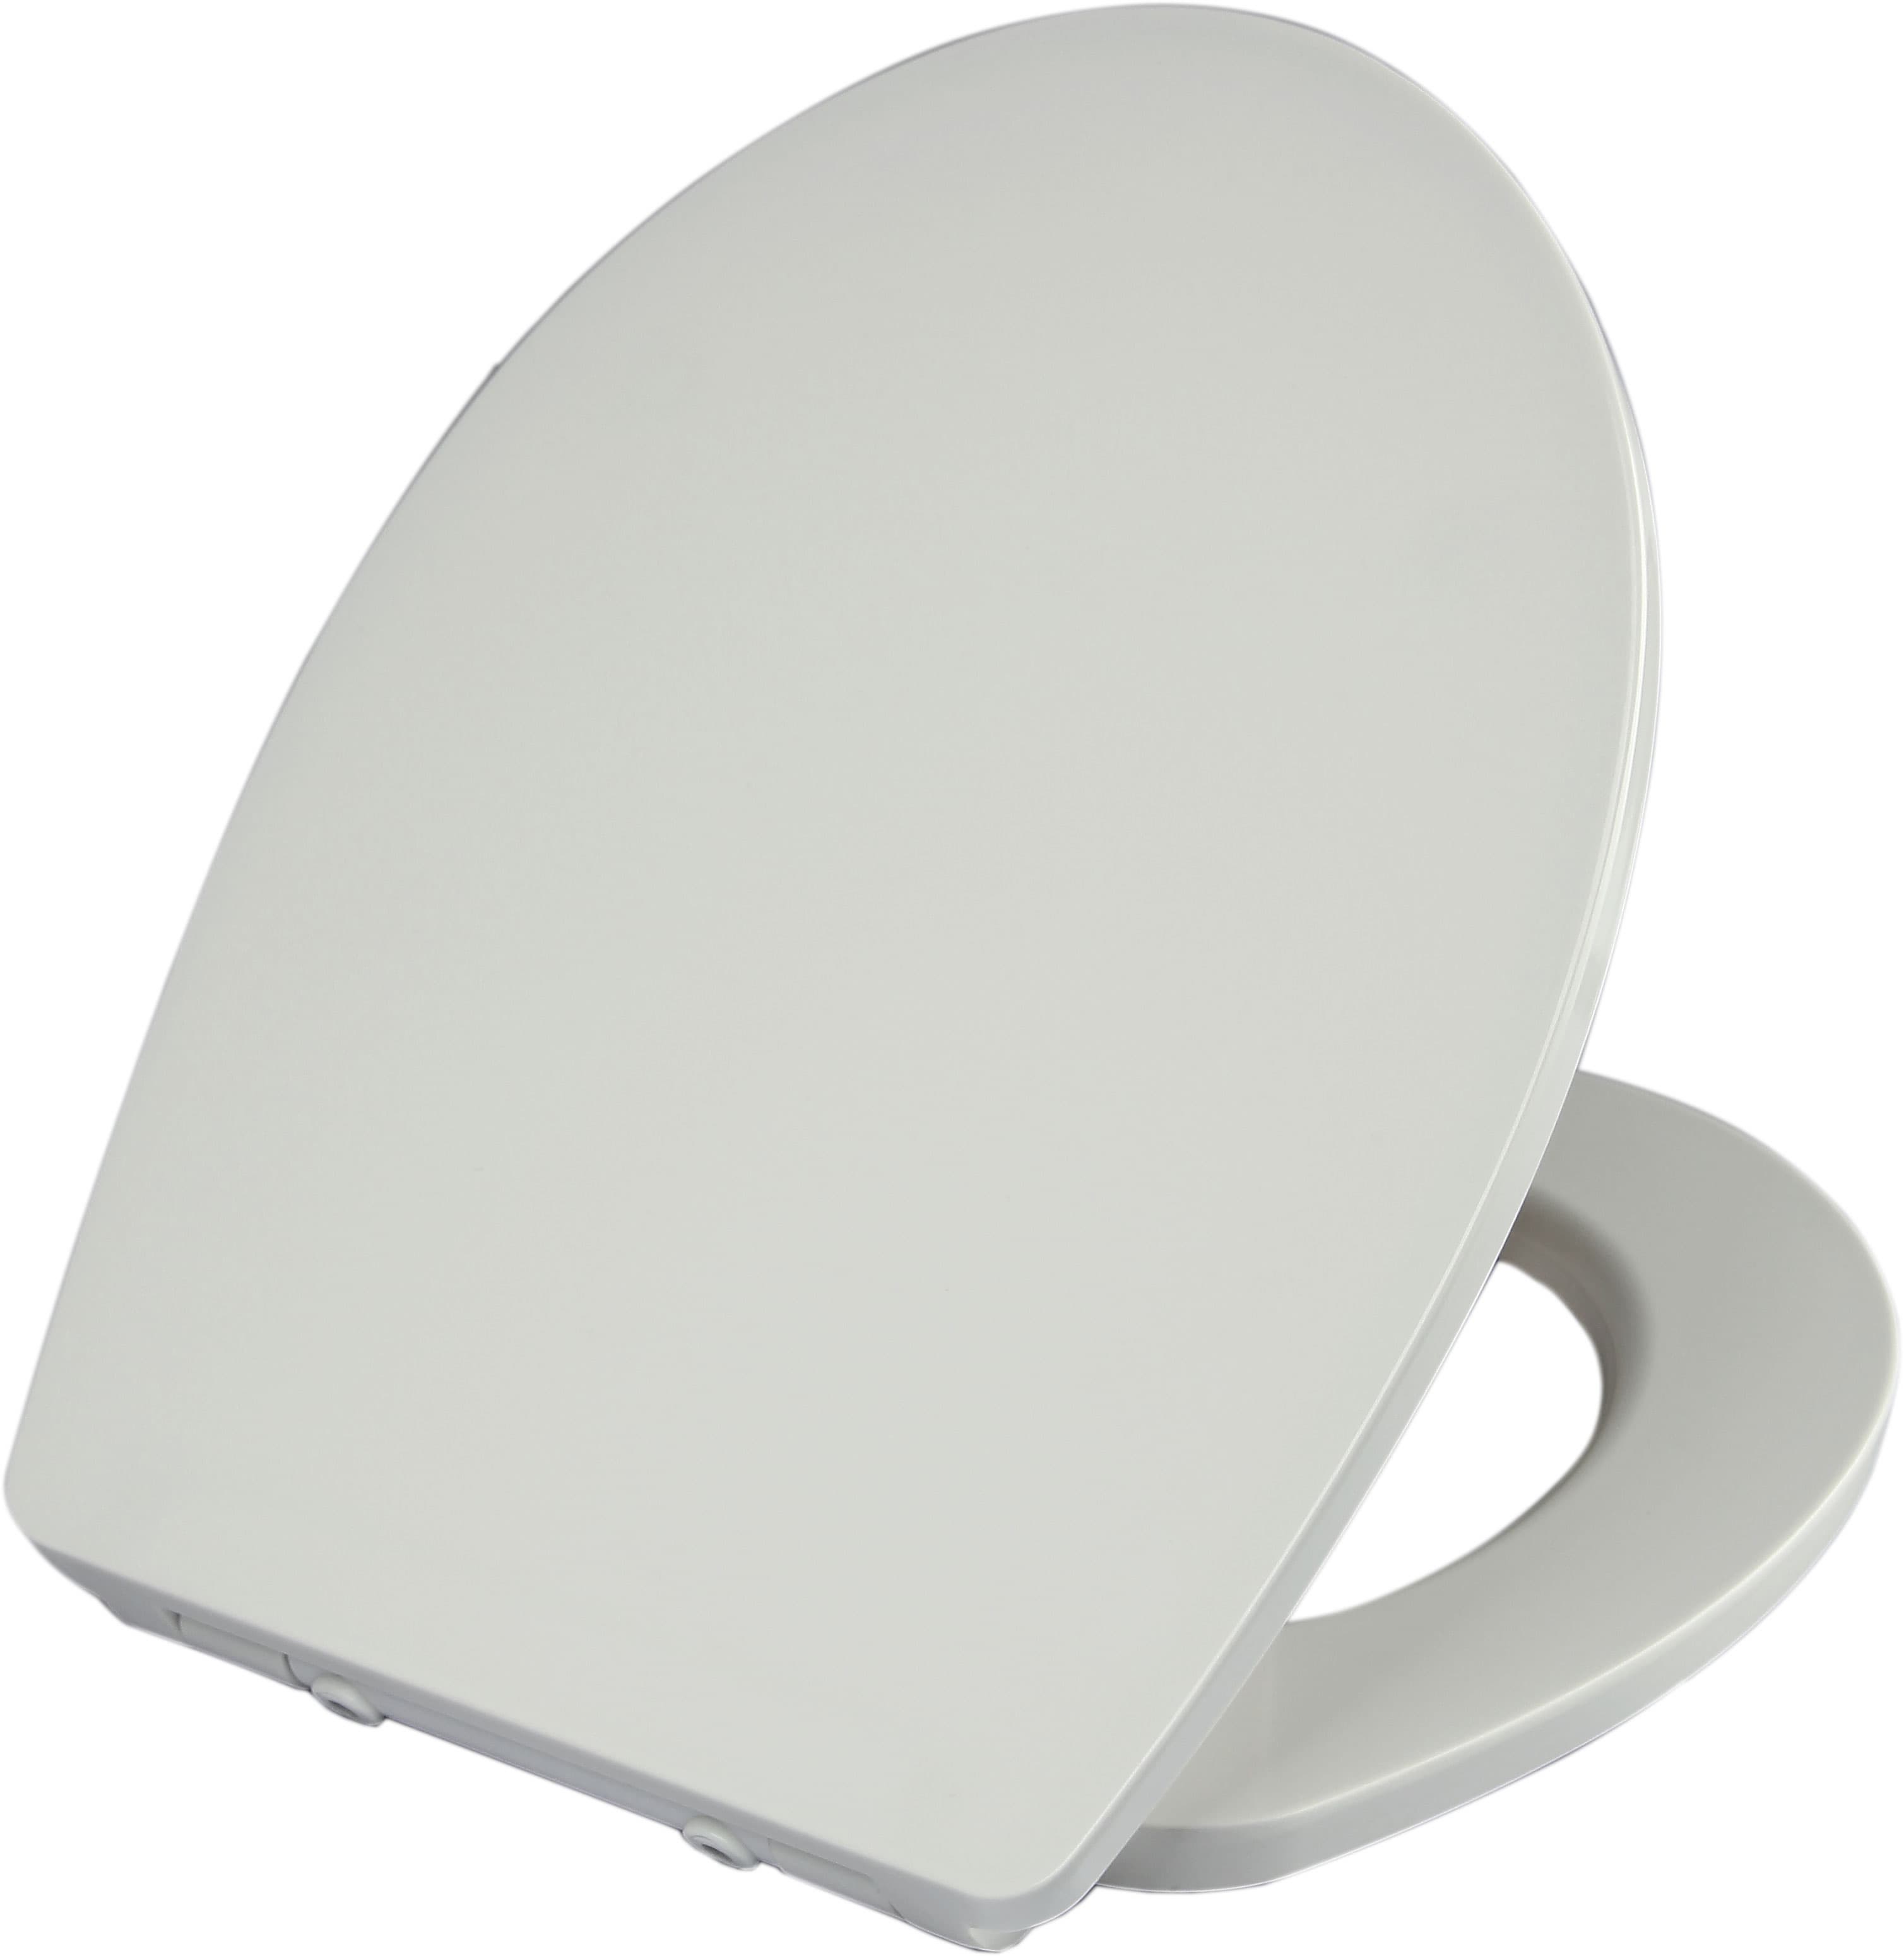 Sanitary ware round UF soft close toilet seat _ cover